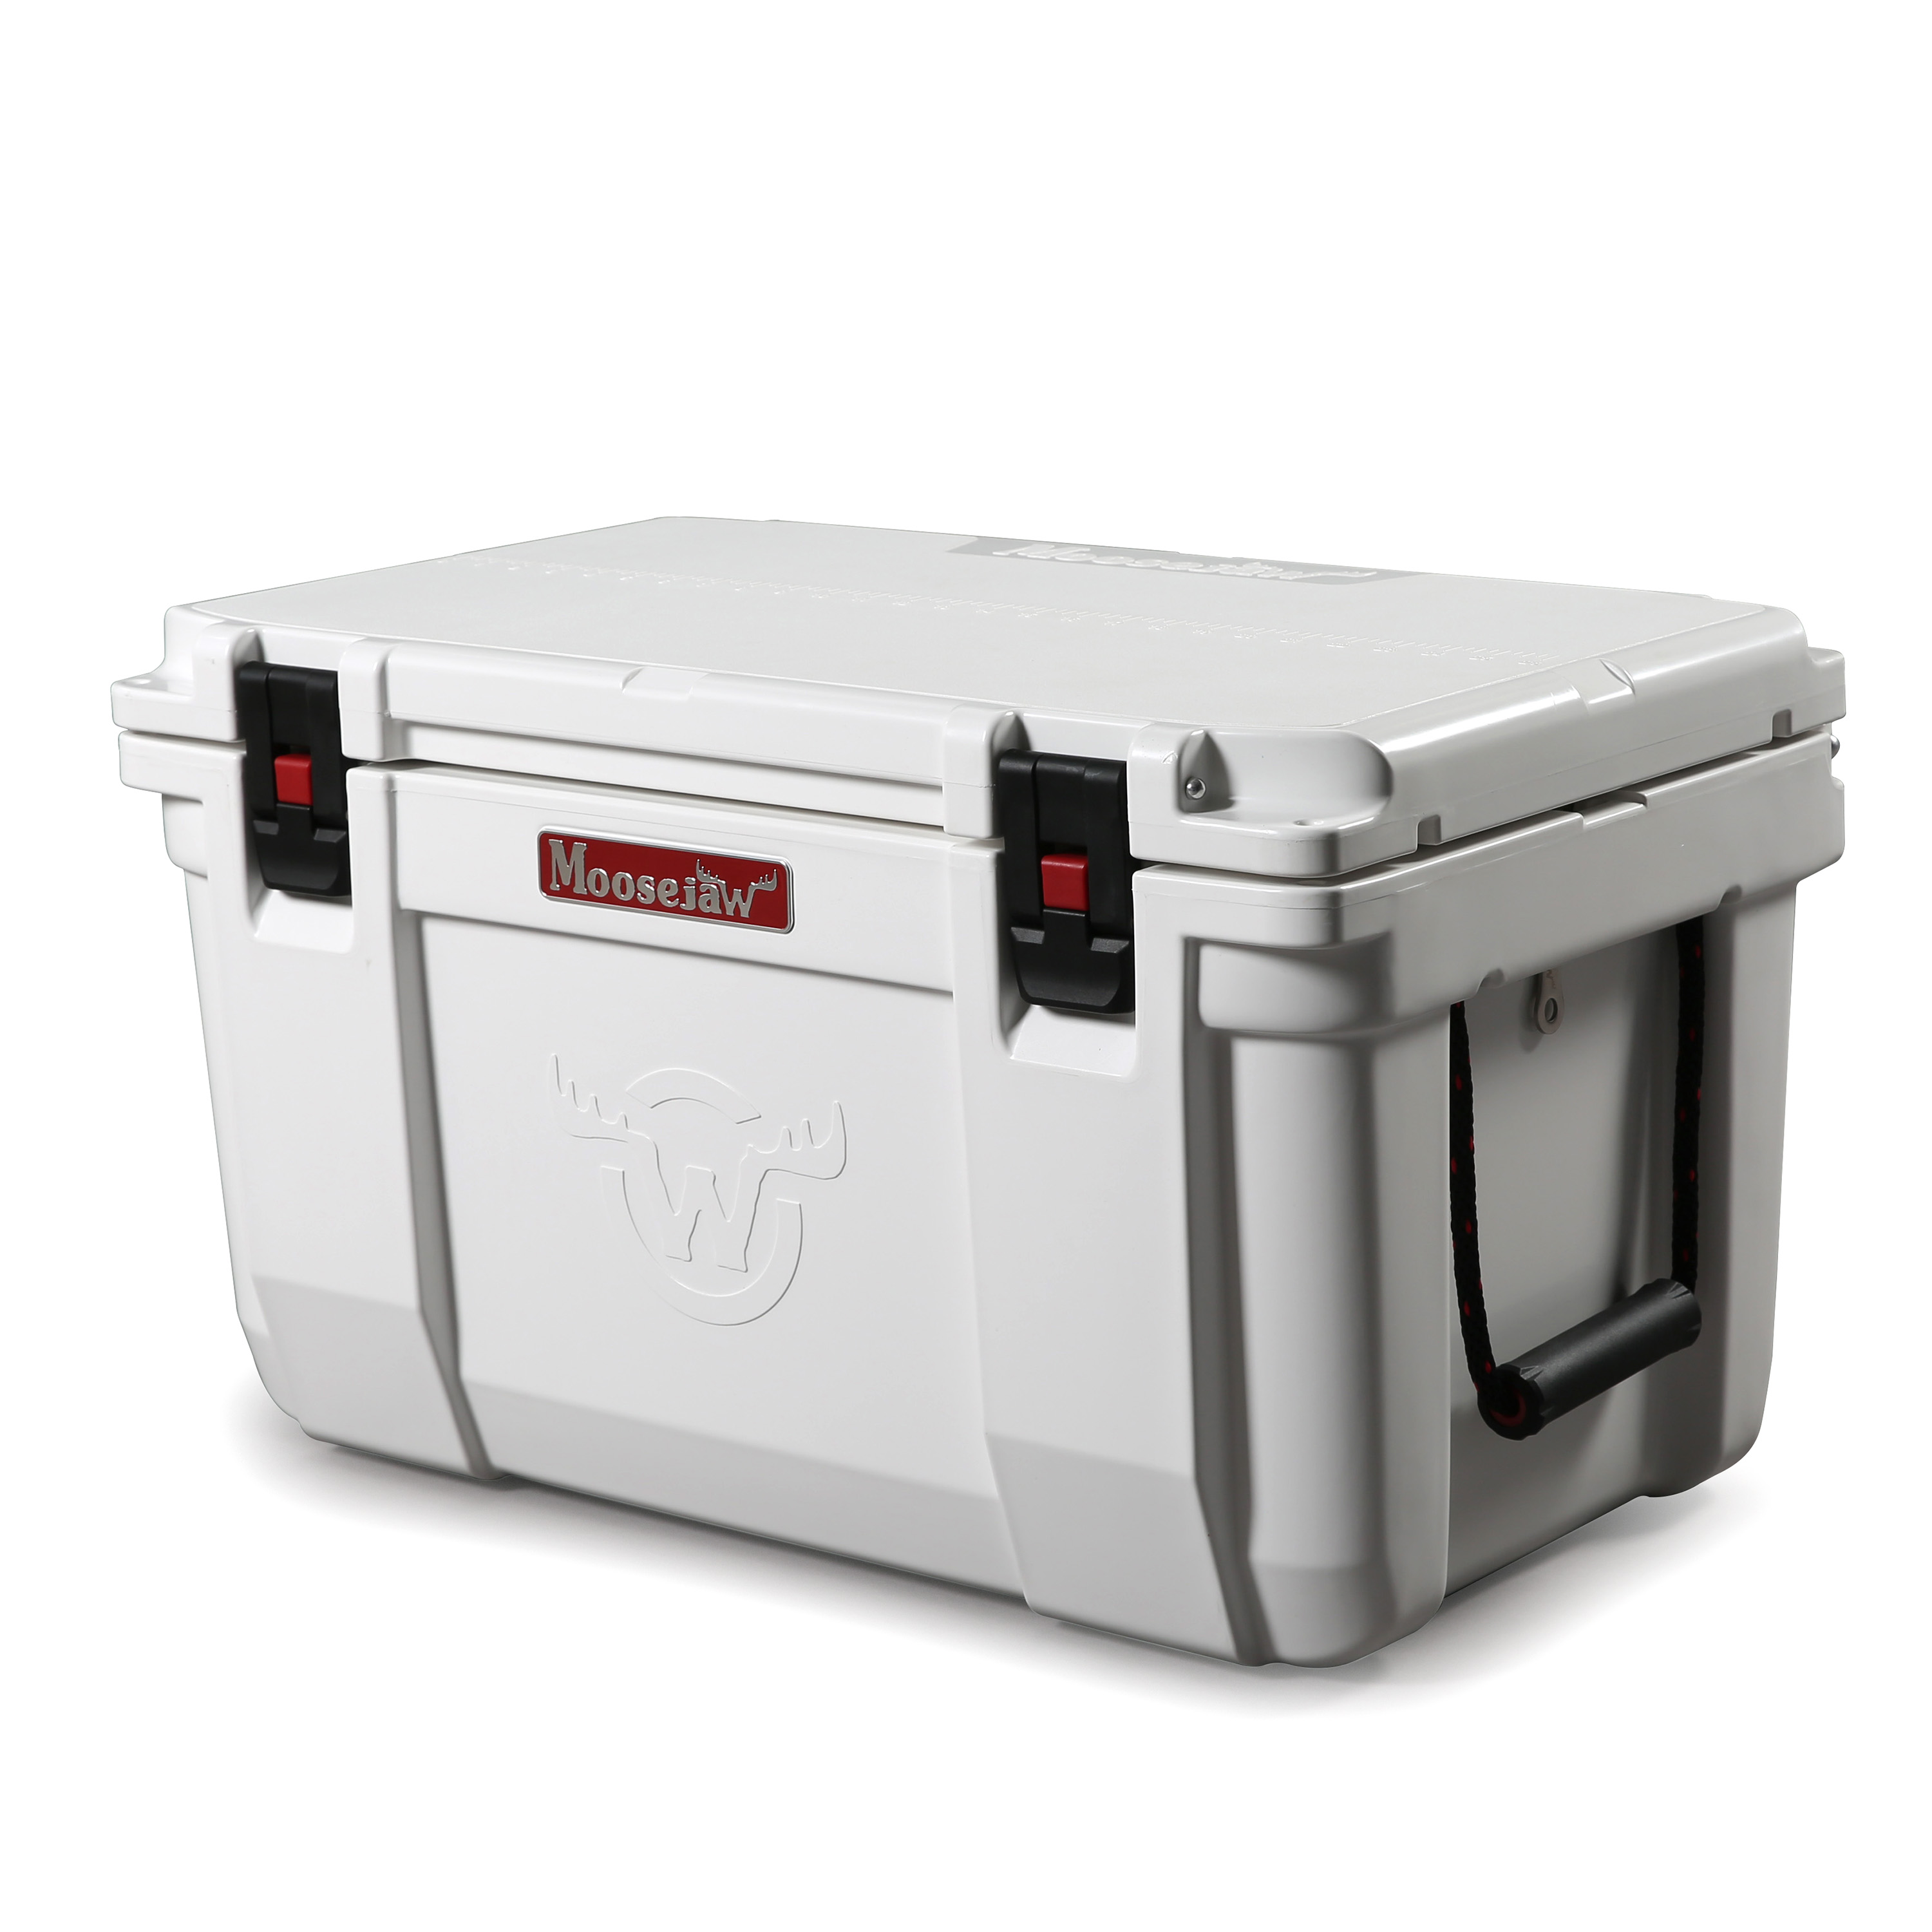 Moosejaw 50 Quart Ice Fort Hard Cooler with Microban, Snow - image 2 of 12